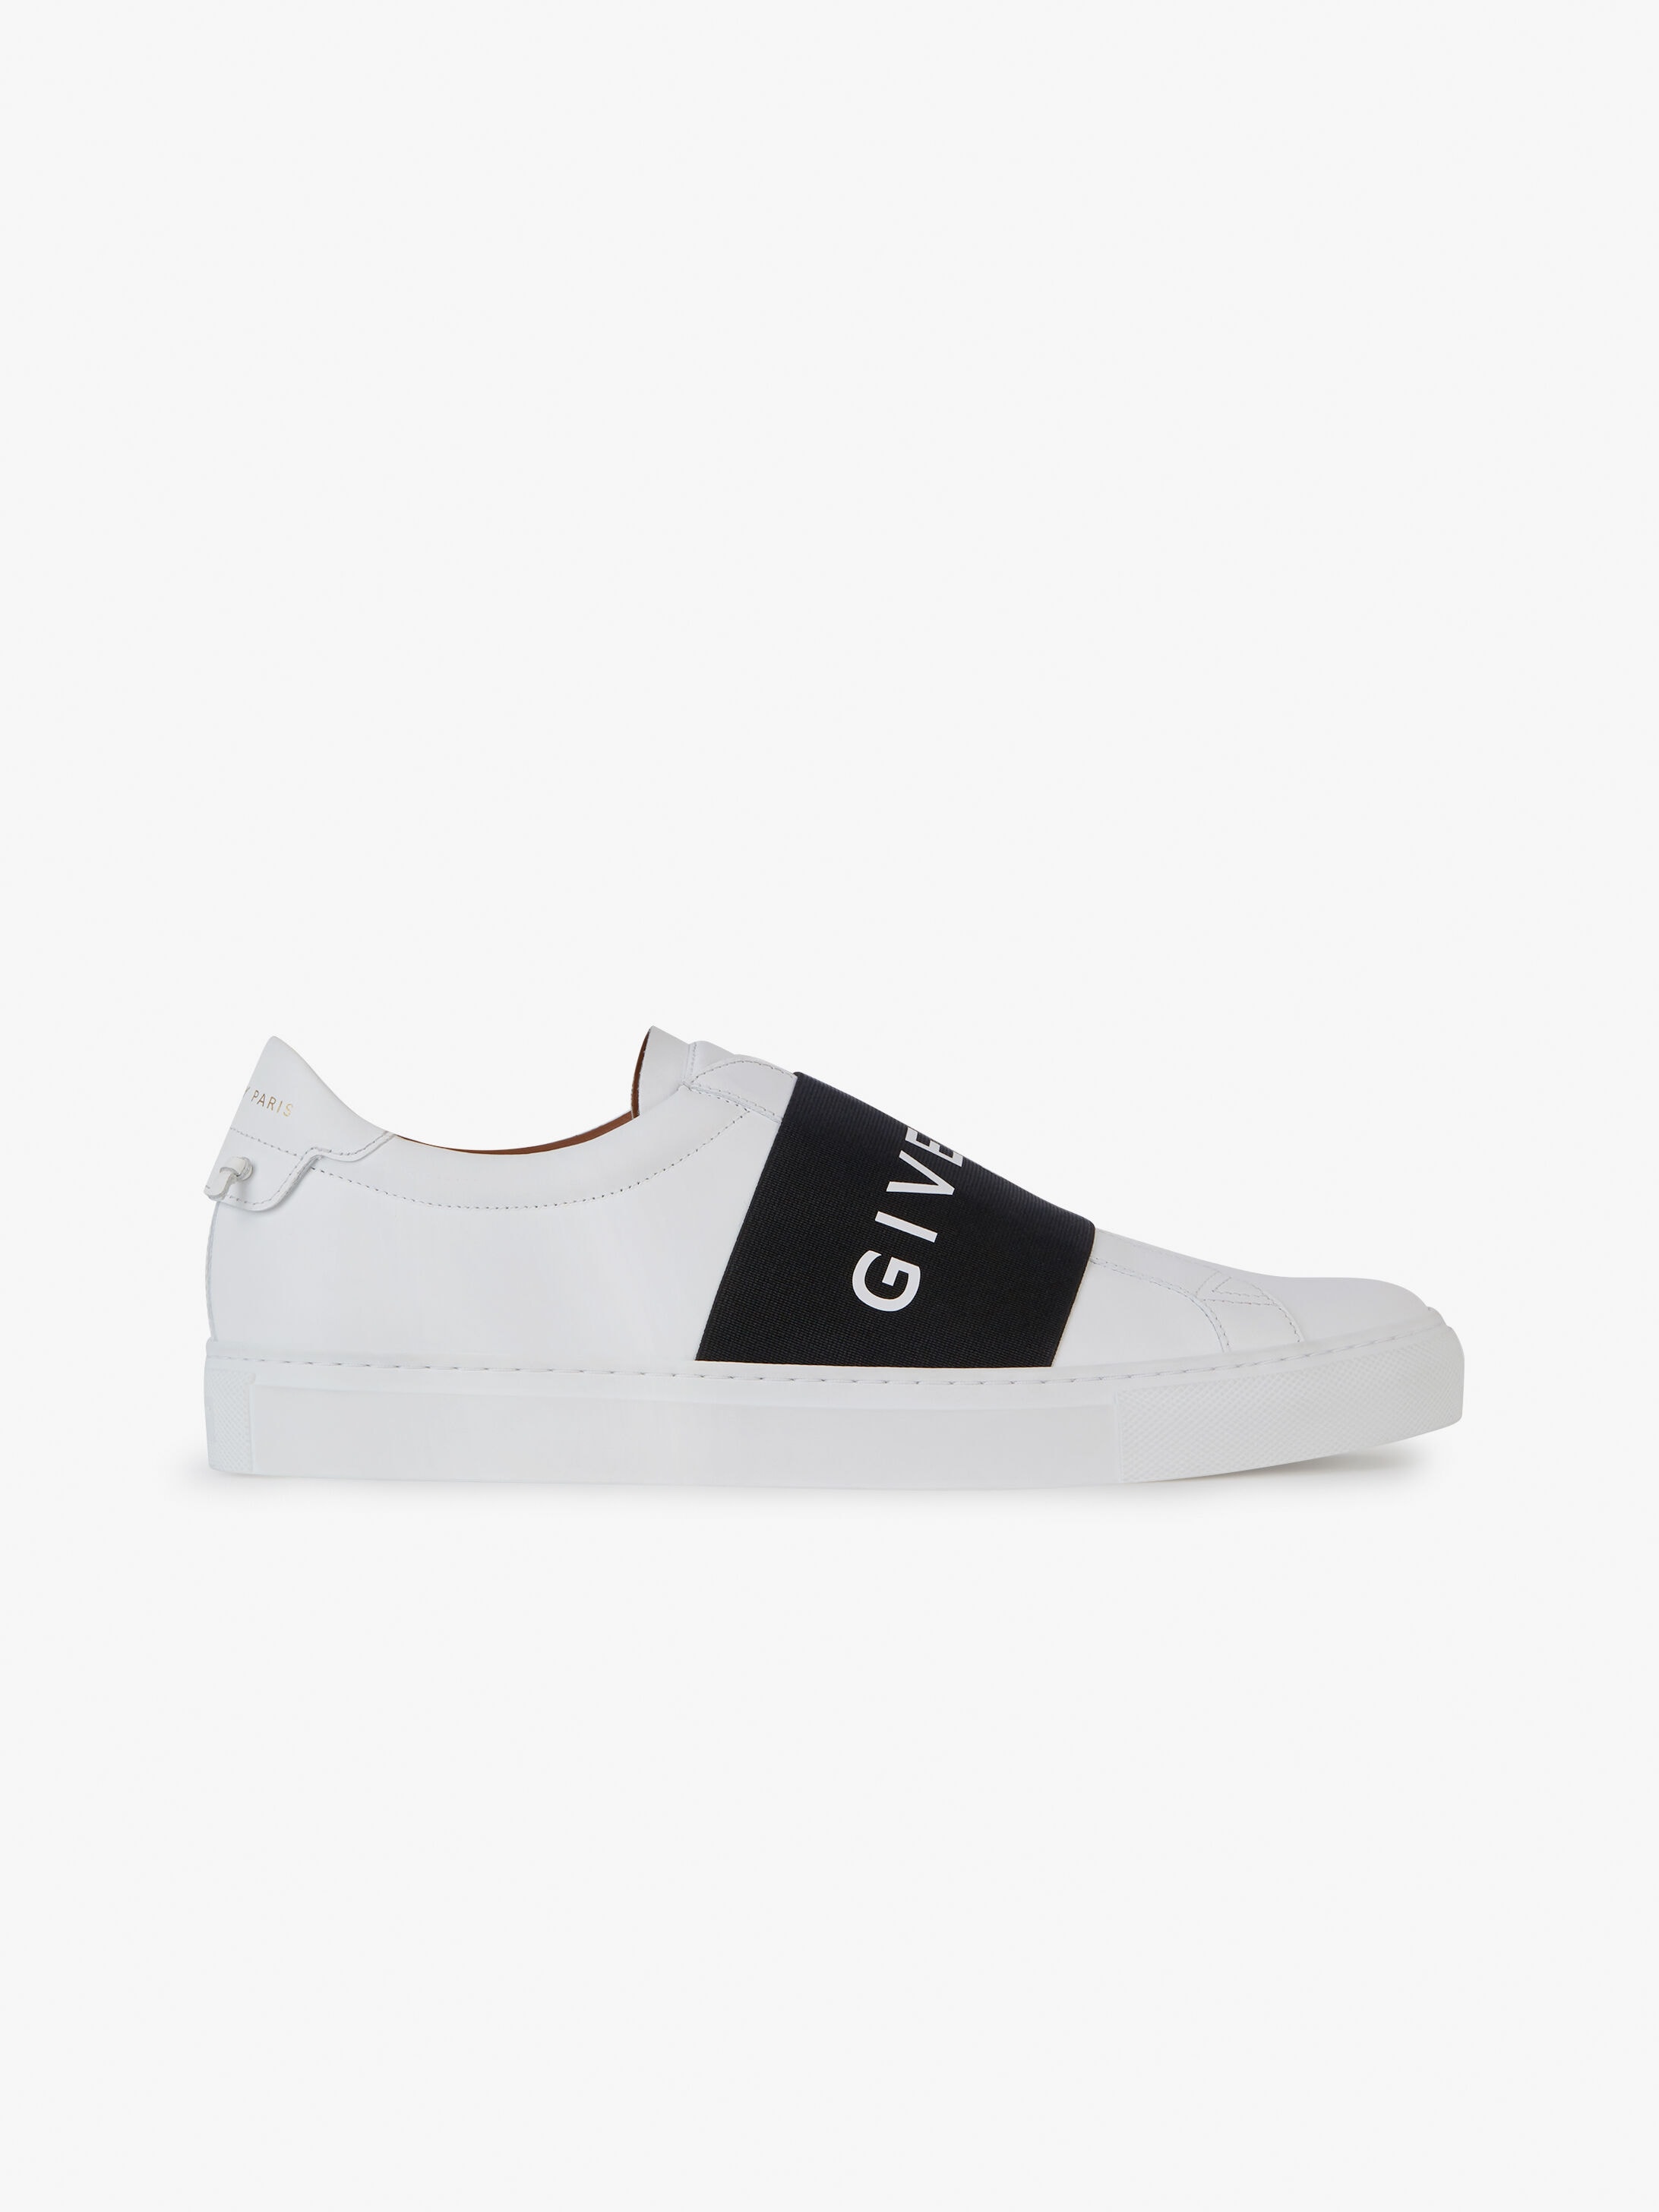 givenchy shoes black and white